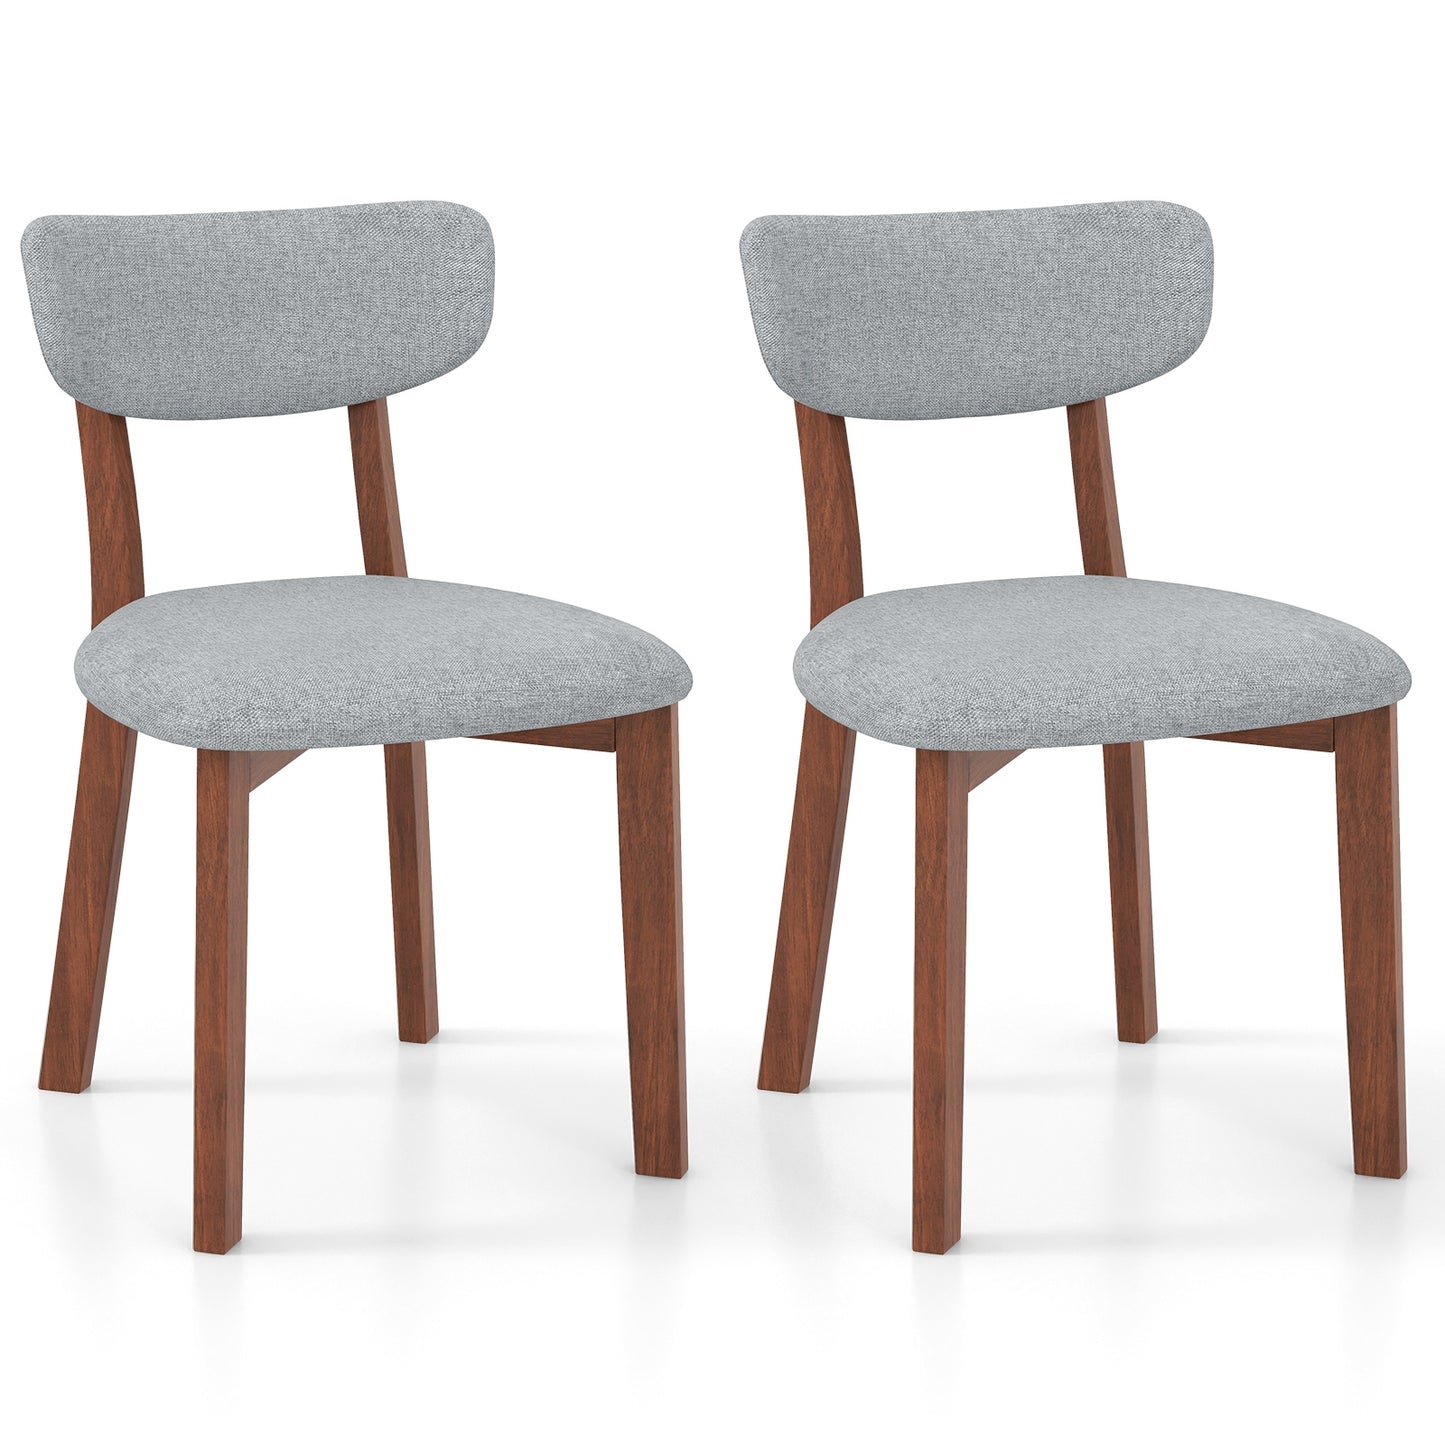 Dining Chairs Set of 2 Upholstered Mid-Back Chairs with Solid Rubber Wood Frame-Gray